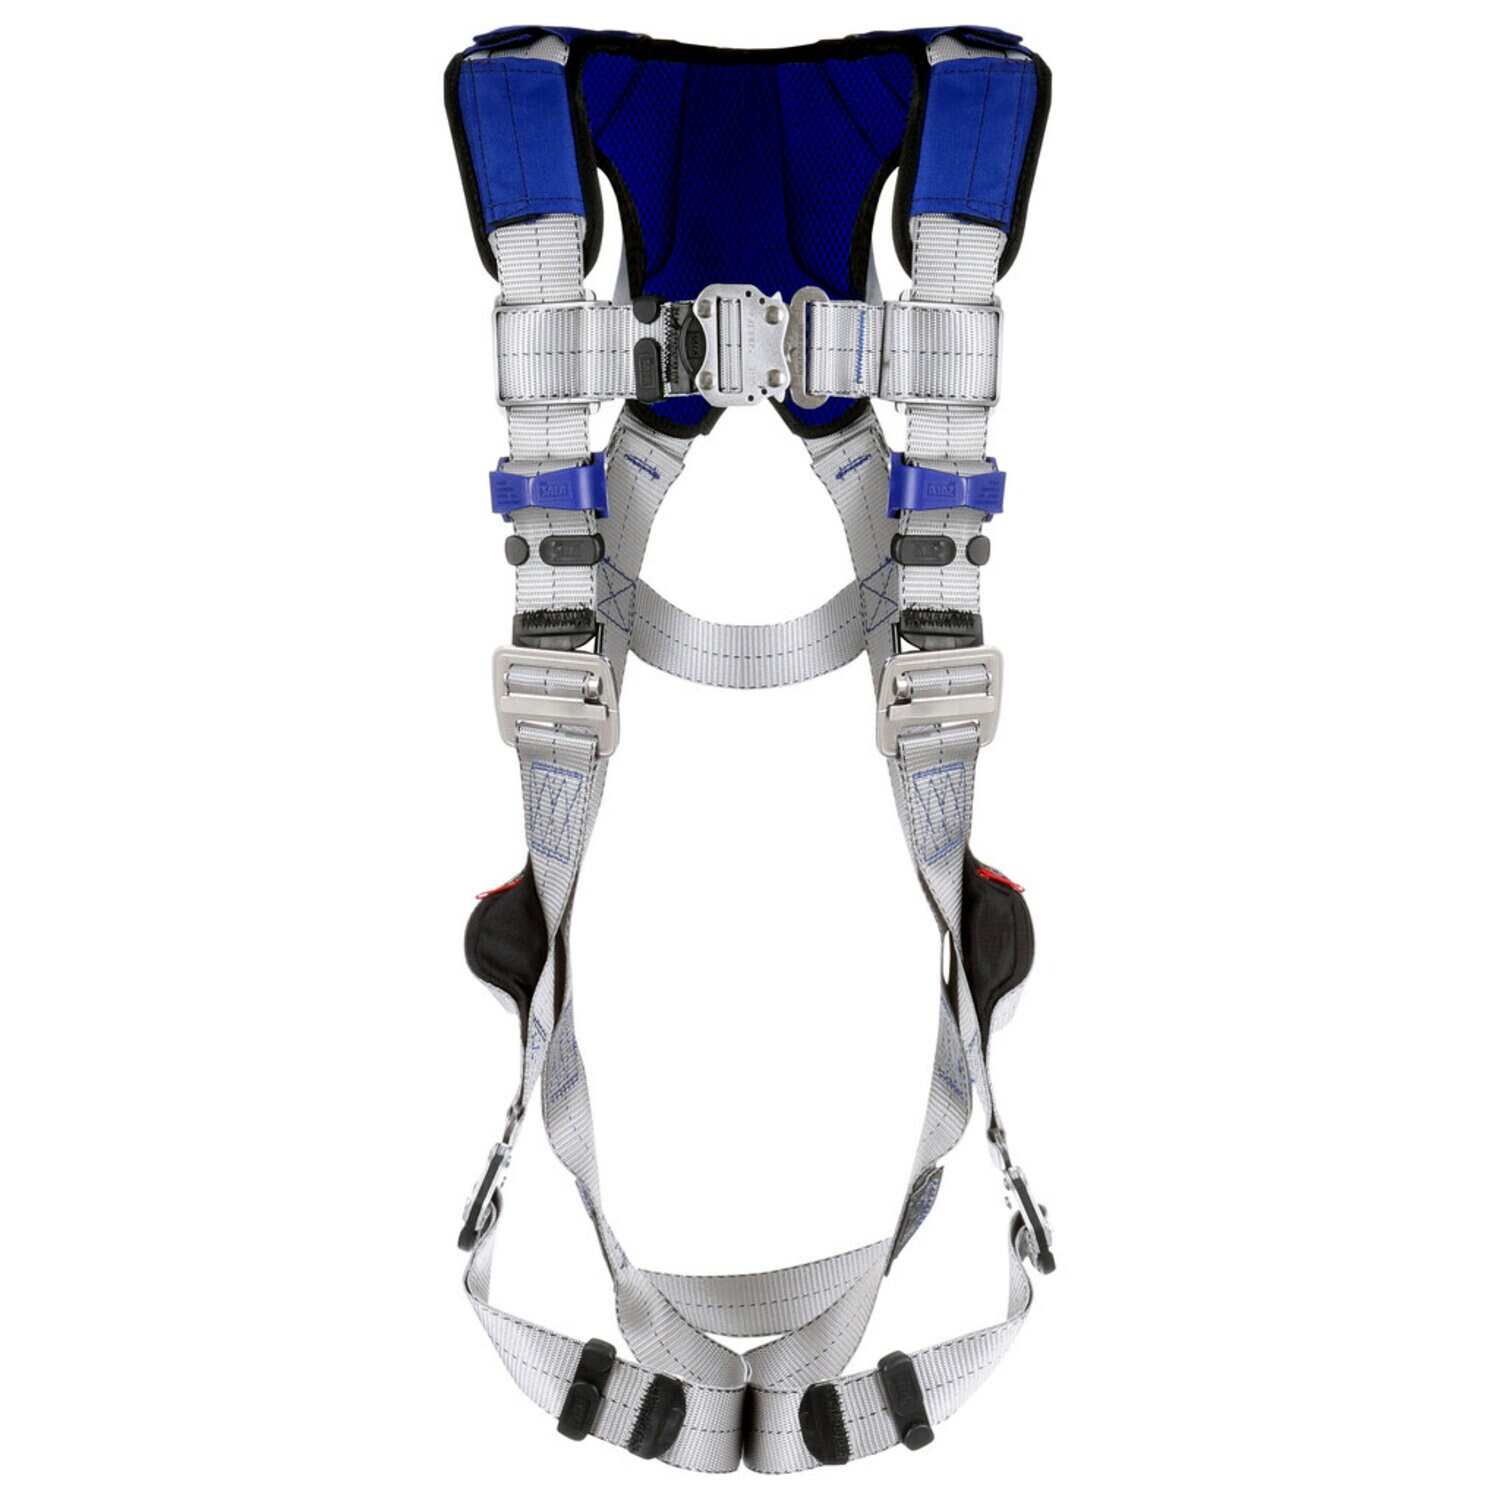 7012817670 - 3M DBI-SALA ExoFit X100 Comfort Vest Safety Harness 1401185, Small, Stainless Steel Hardware